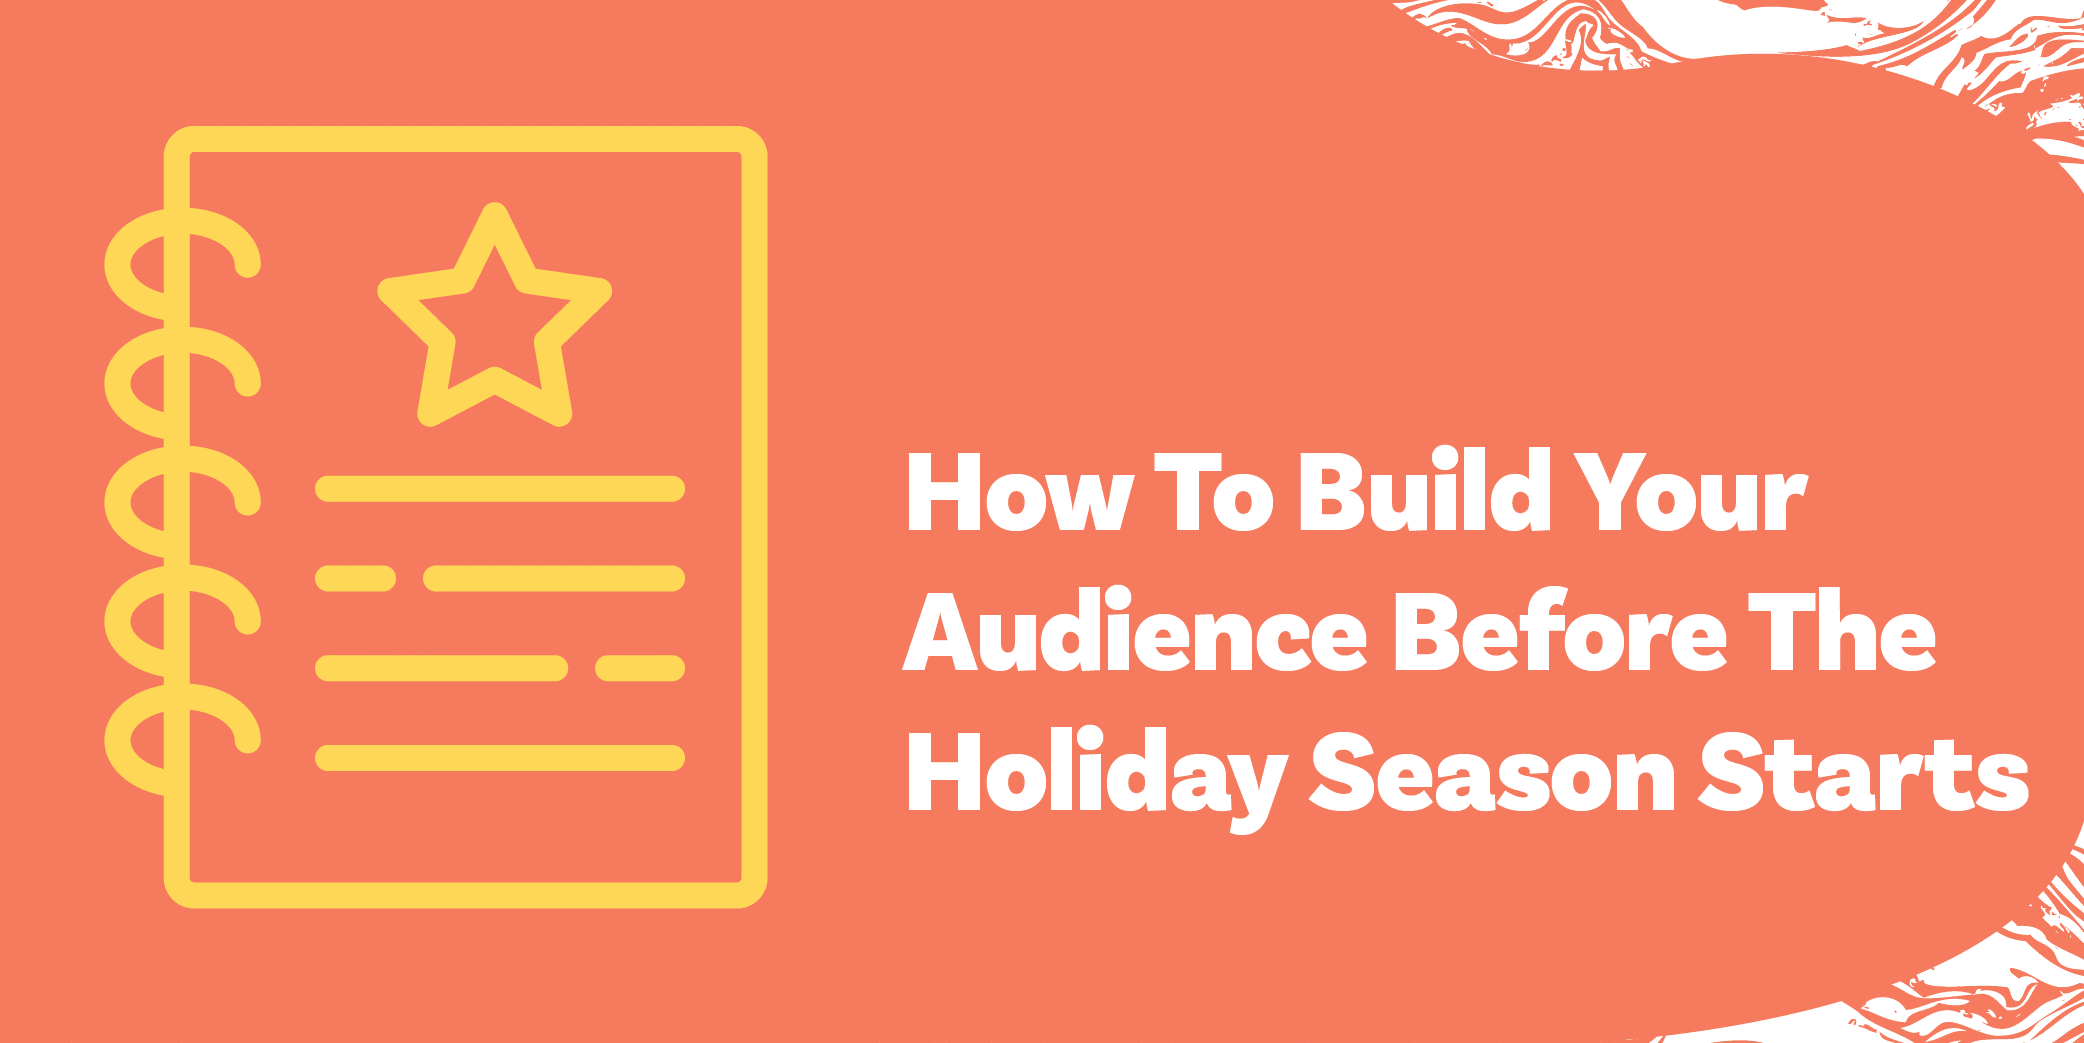 How To Build Your Audience Before The Holiday Season